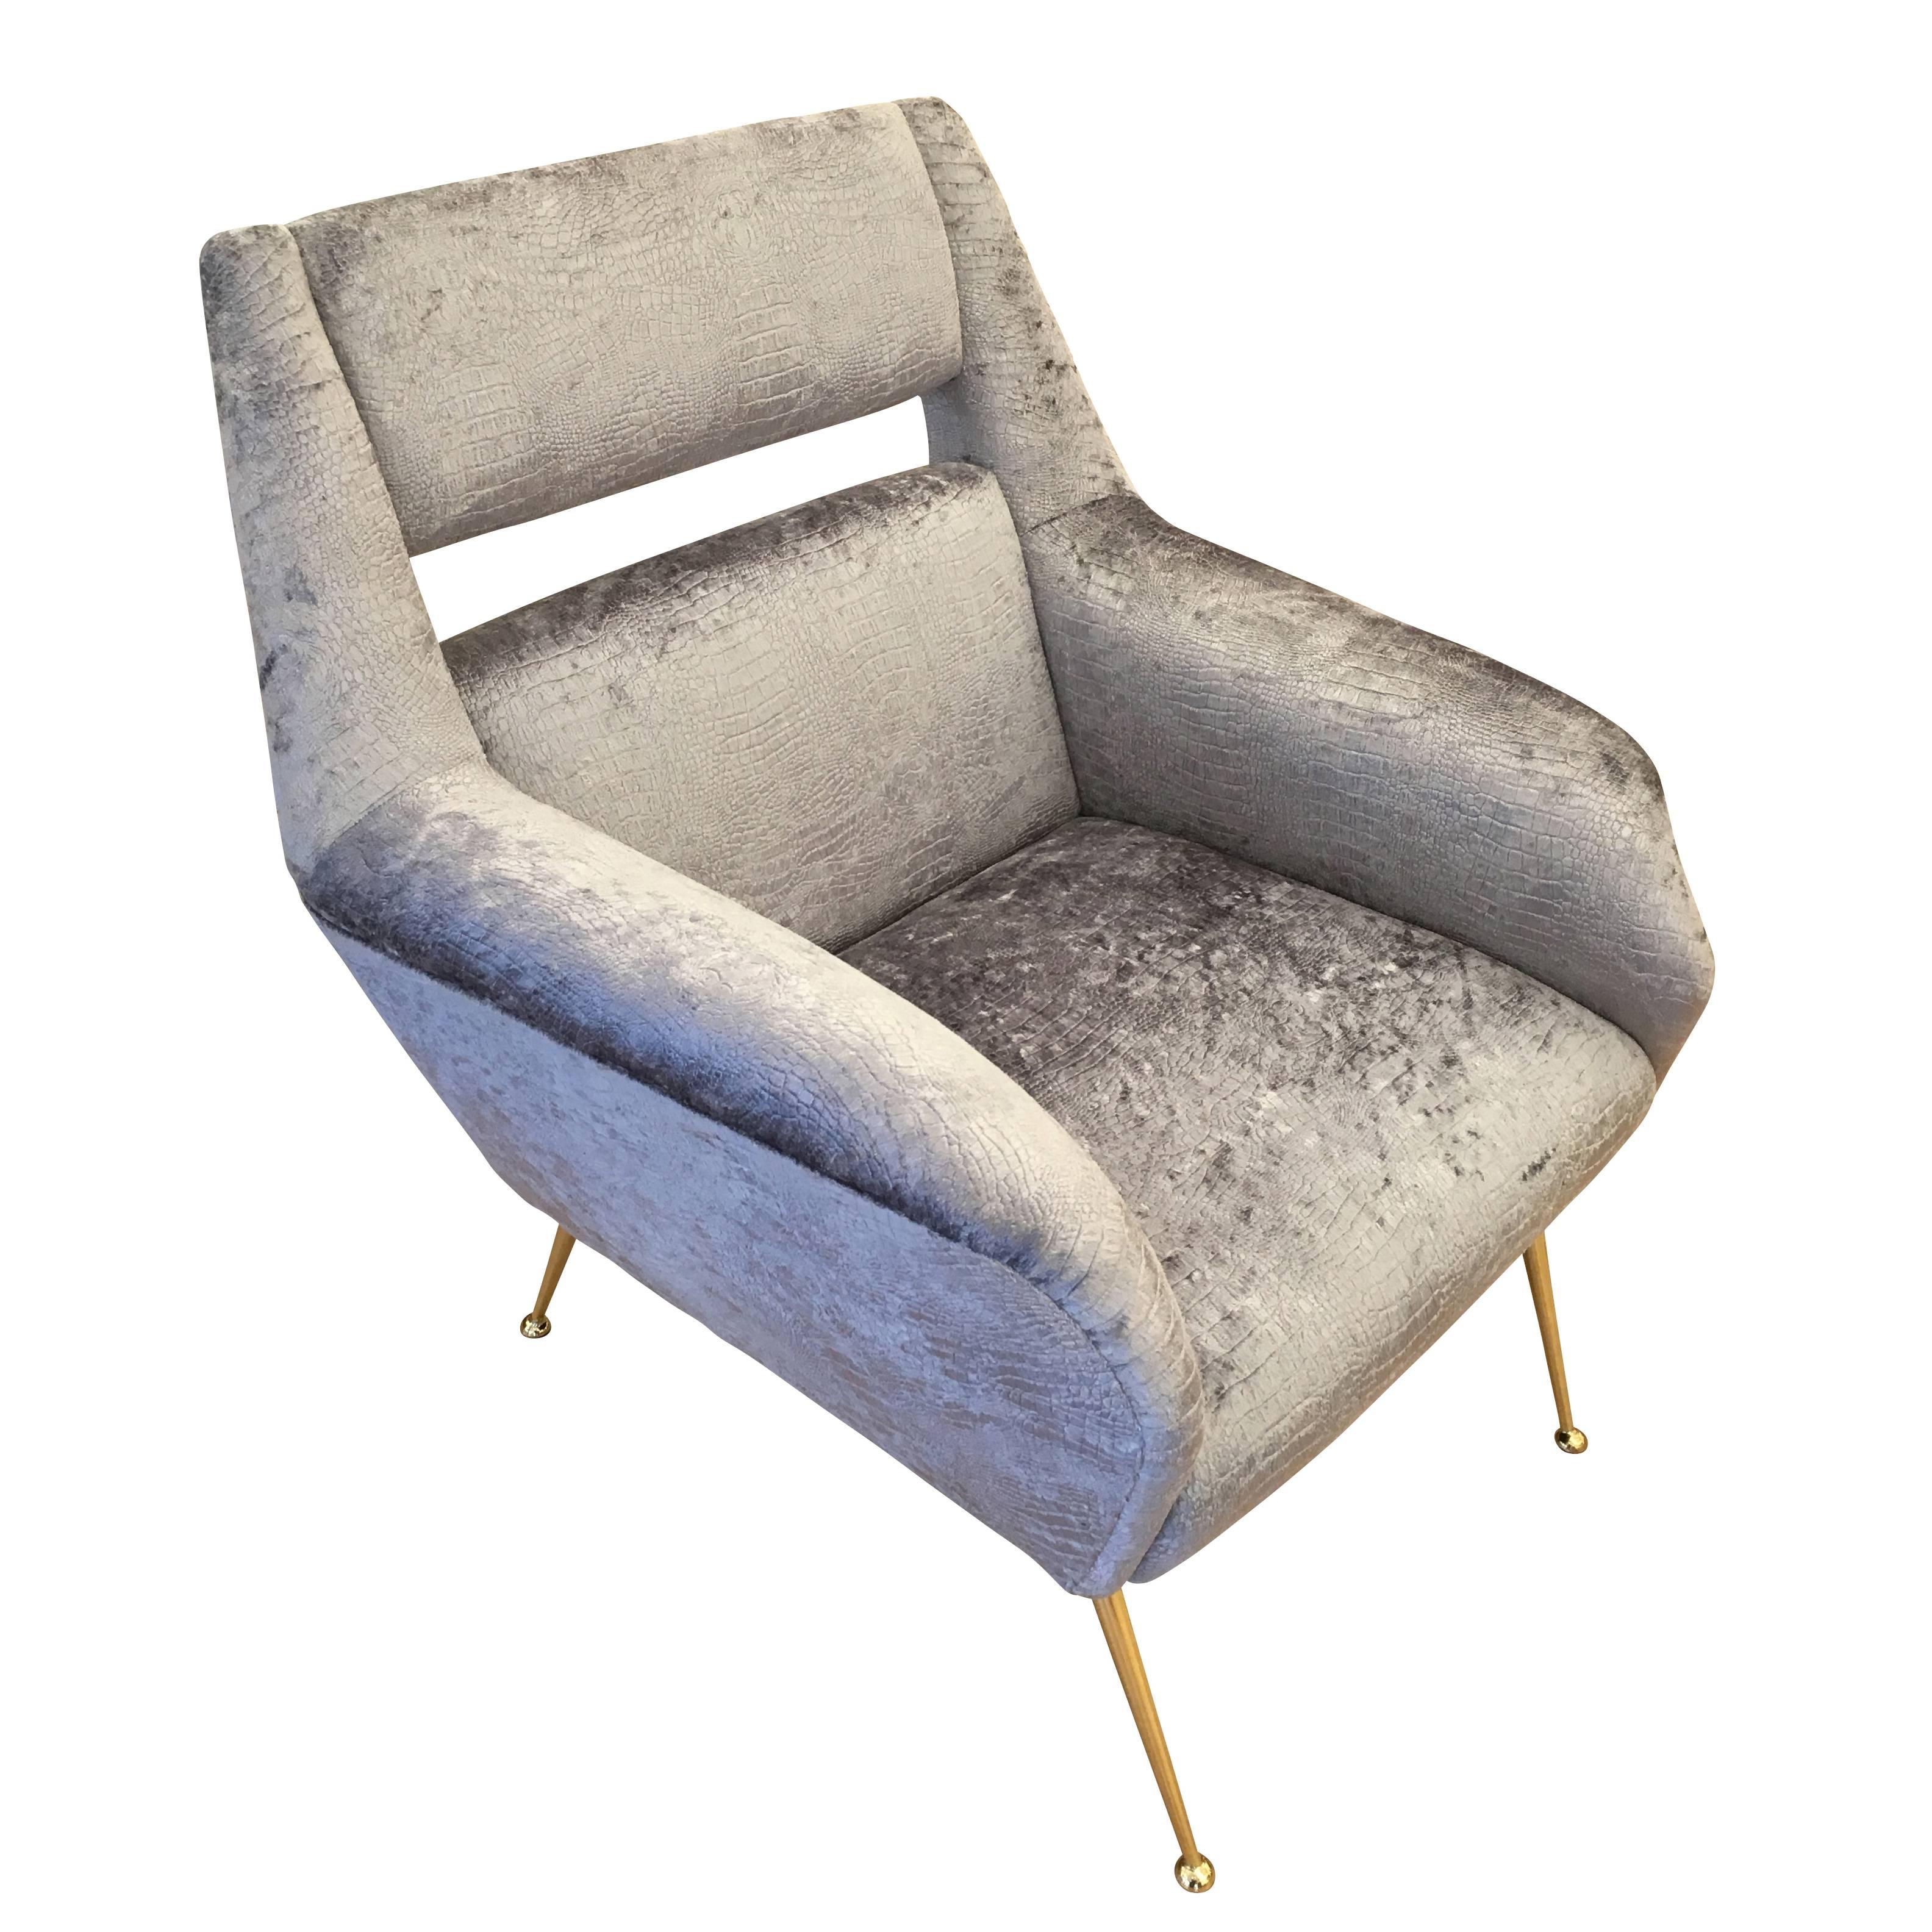 Chic Italian midcentury armchair in the style of Gio Ponti with brass legs and a slit back. Has been re-upholstered in a gray crocodile velvet.

Condition: Newly reupholstered 

Width: 30